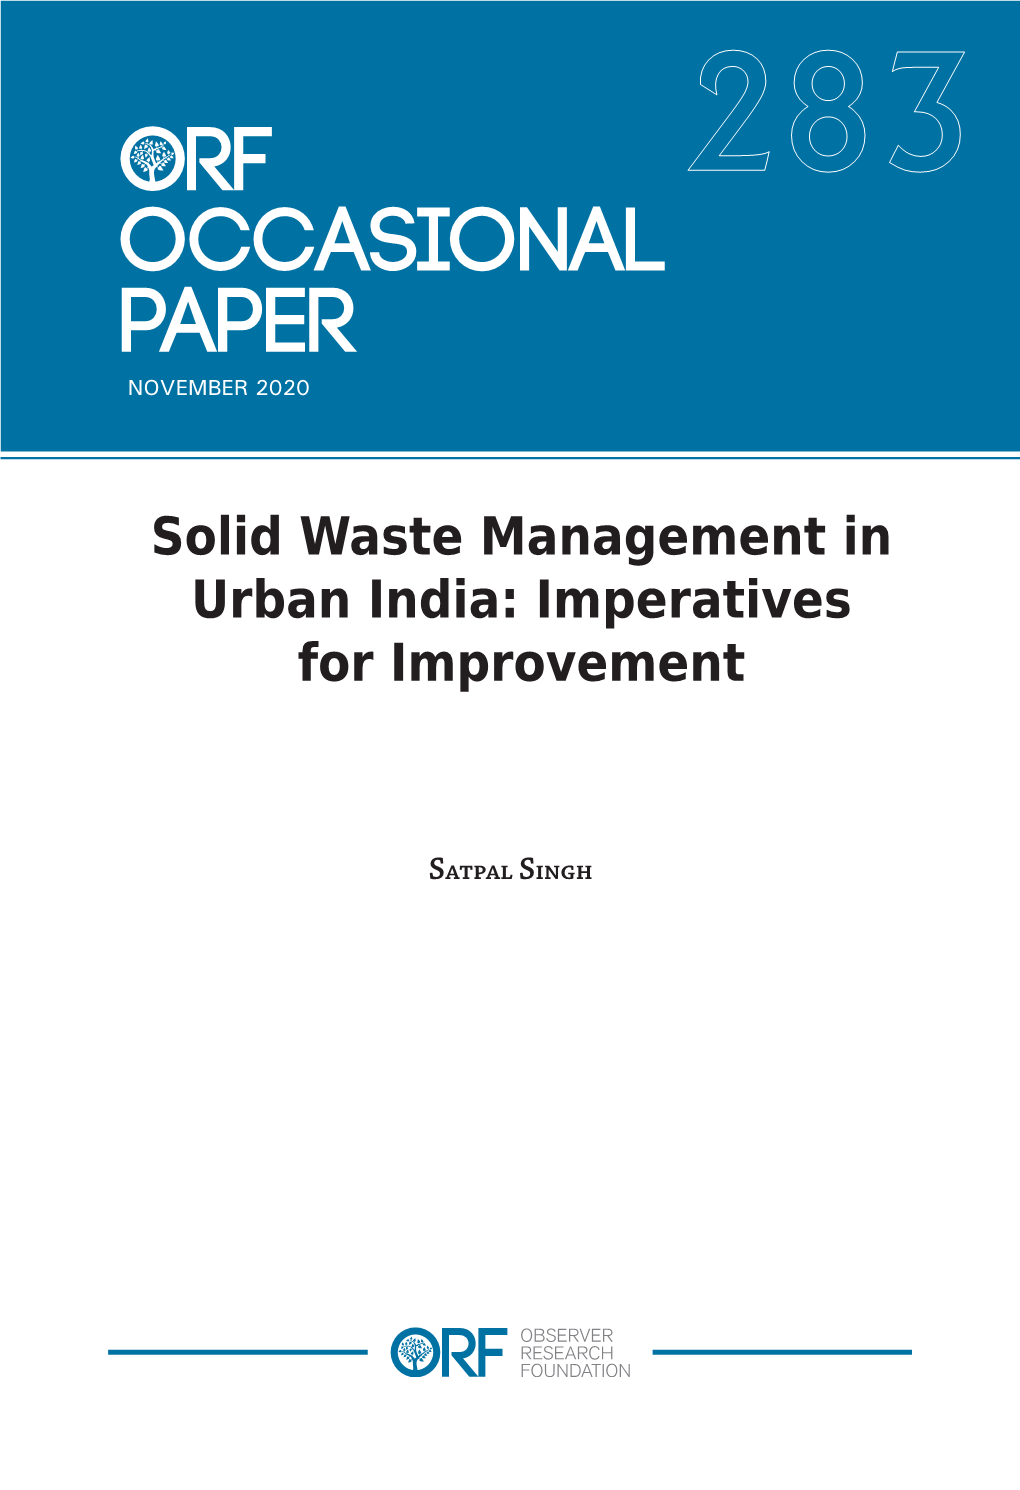 Solid Waste Management in Urban India: Imperatives for Improvement